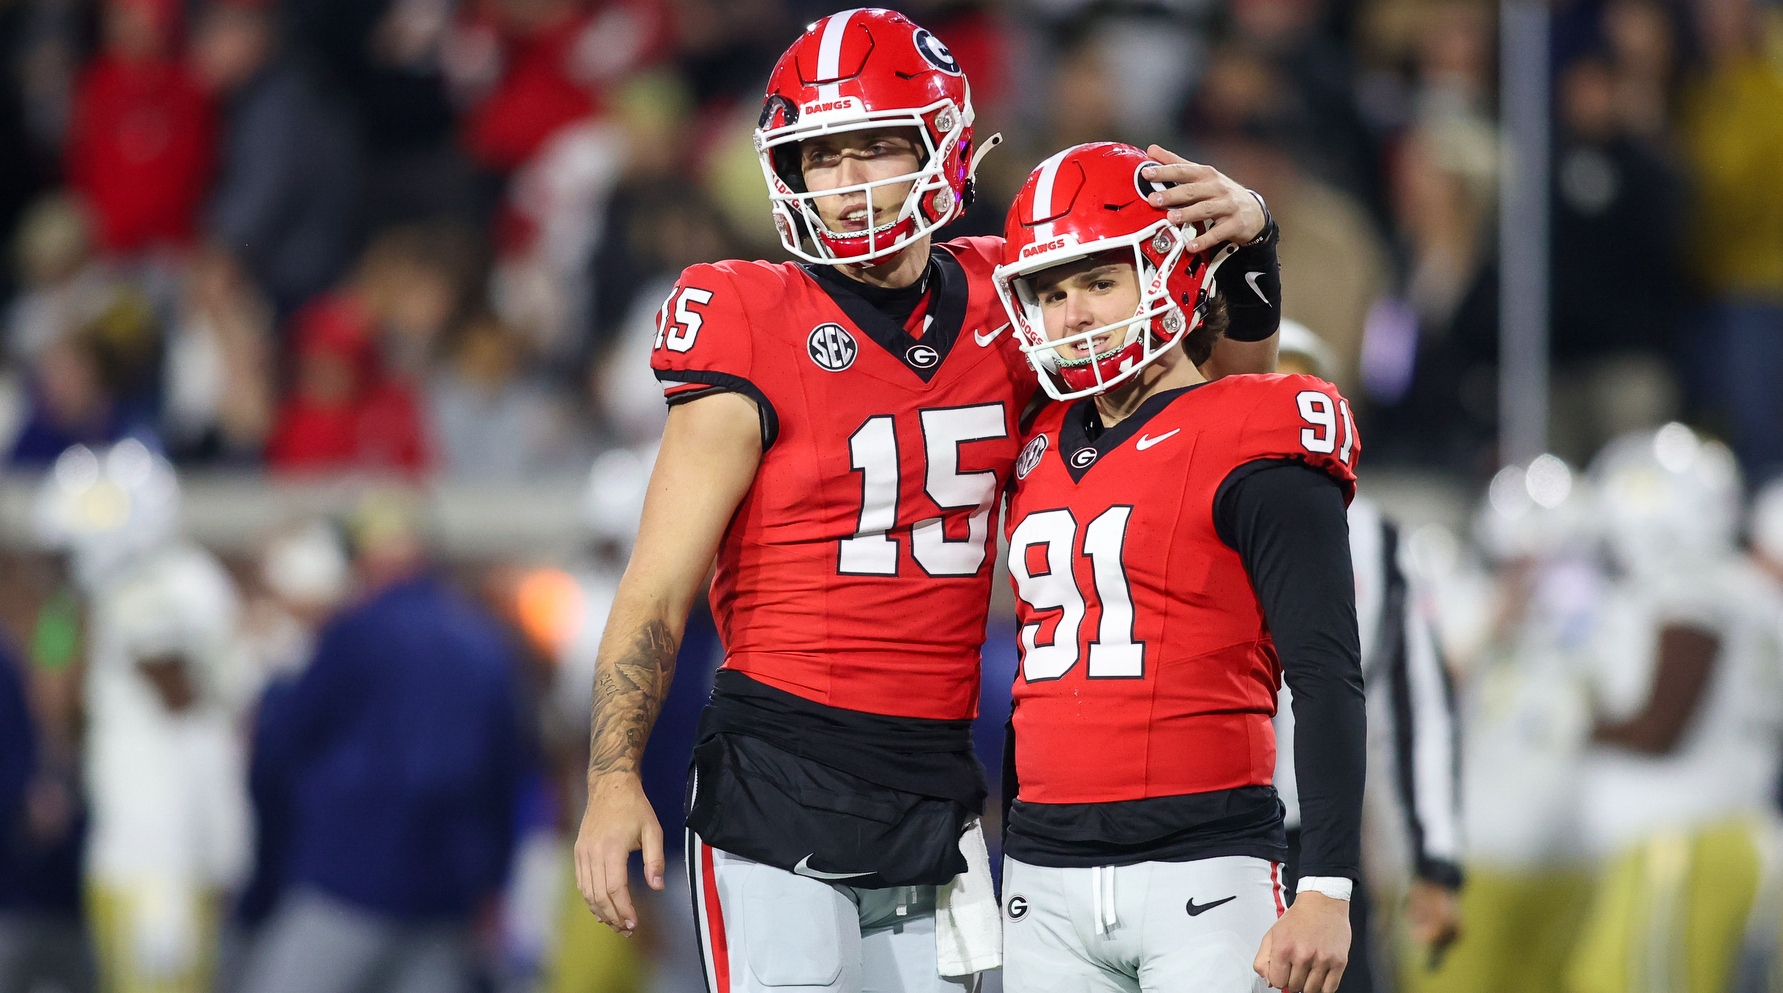 Georgia quarterback Carson Beck embraces kicker Peyton Woodring after a made extra point.